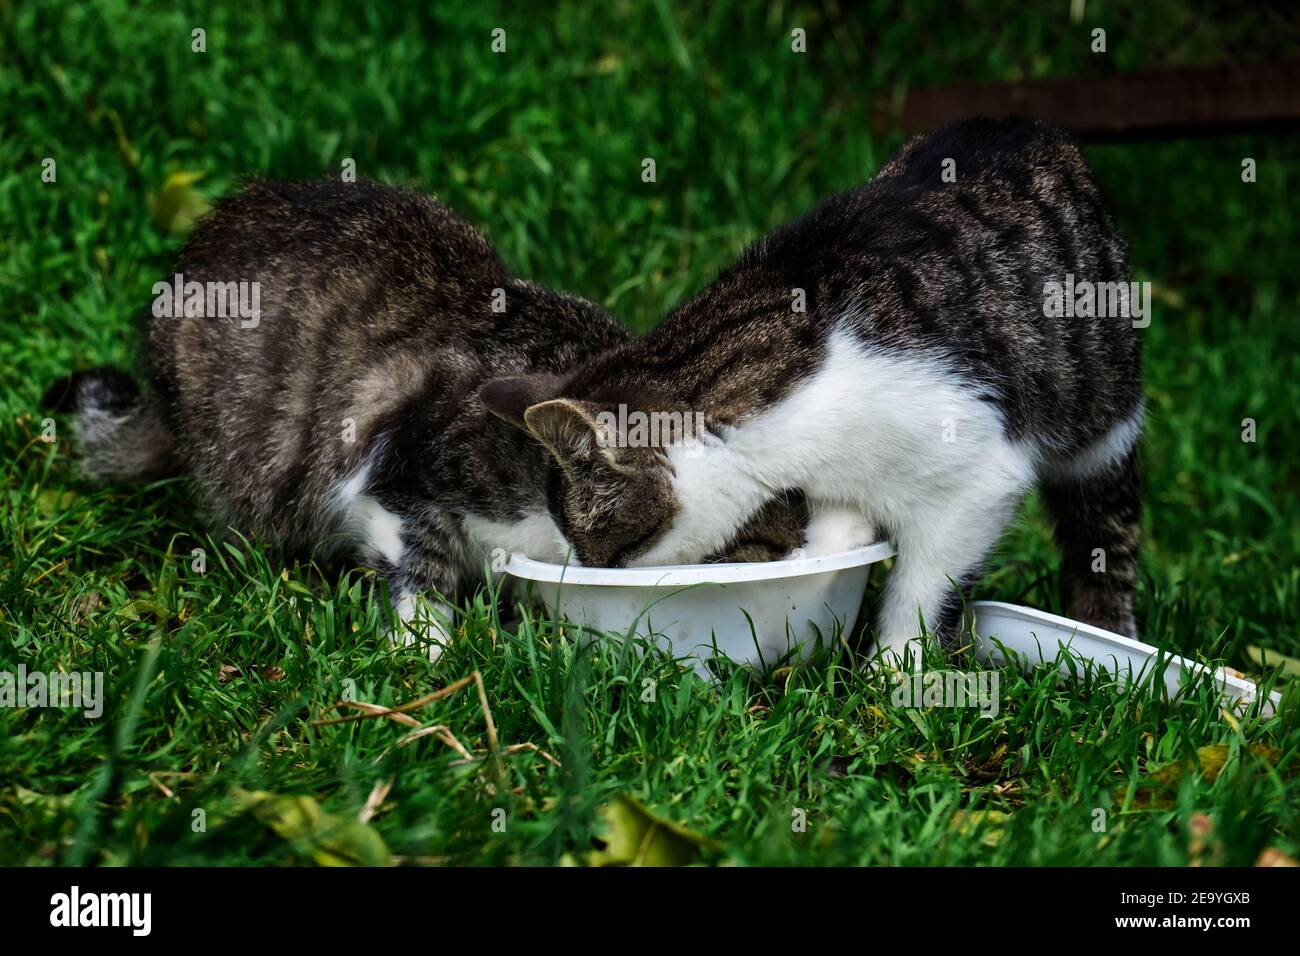 Two homeless kittens eating from a plastic bowl Stock Photo